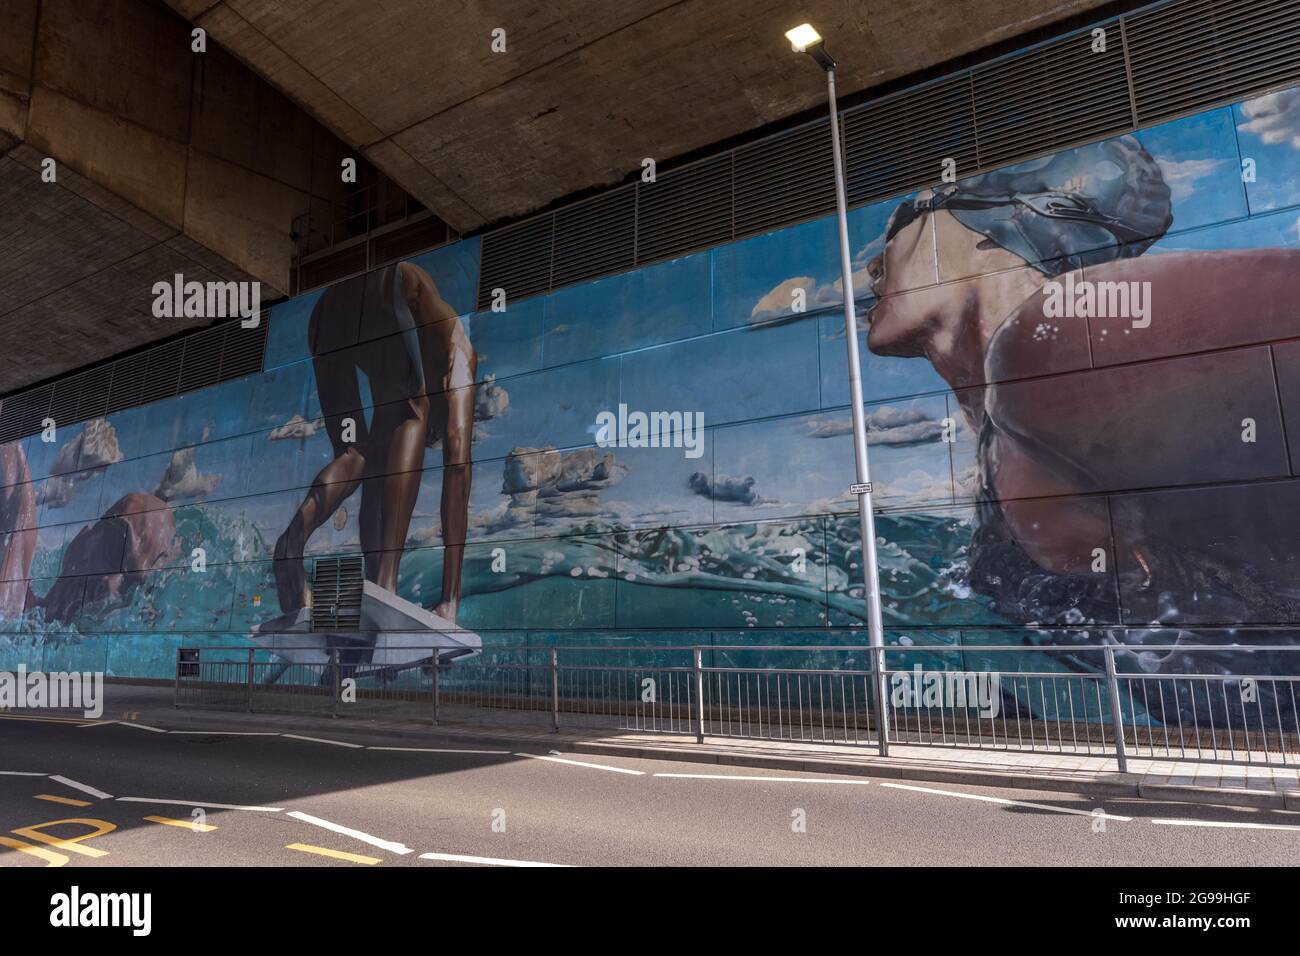 The Swimmer, by Smug, celebrates Glasgow’s 2014 Commonwealth Games. Street art in Glasgow and one of the murals of the city centre mural trail. Stock Photo